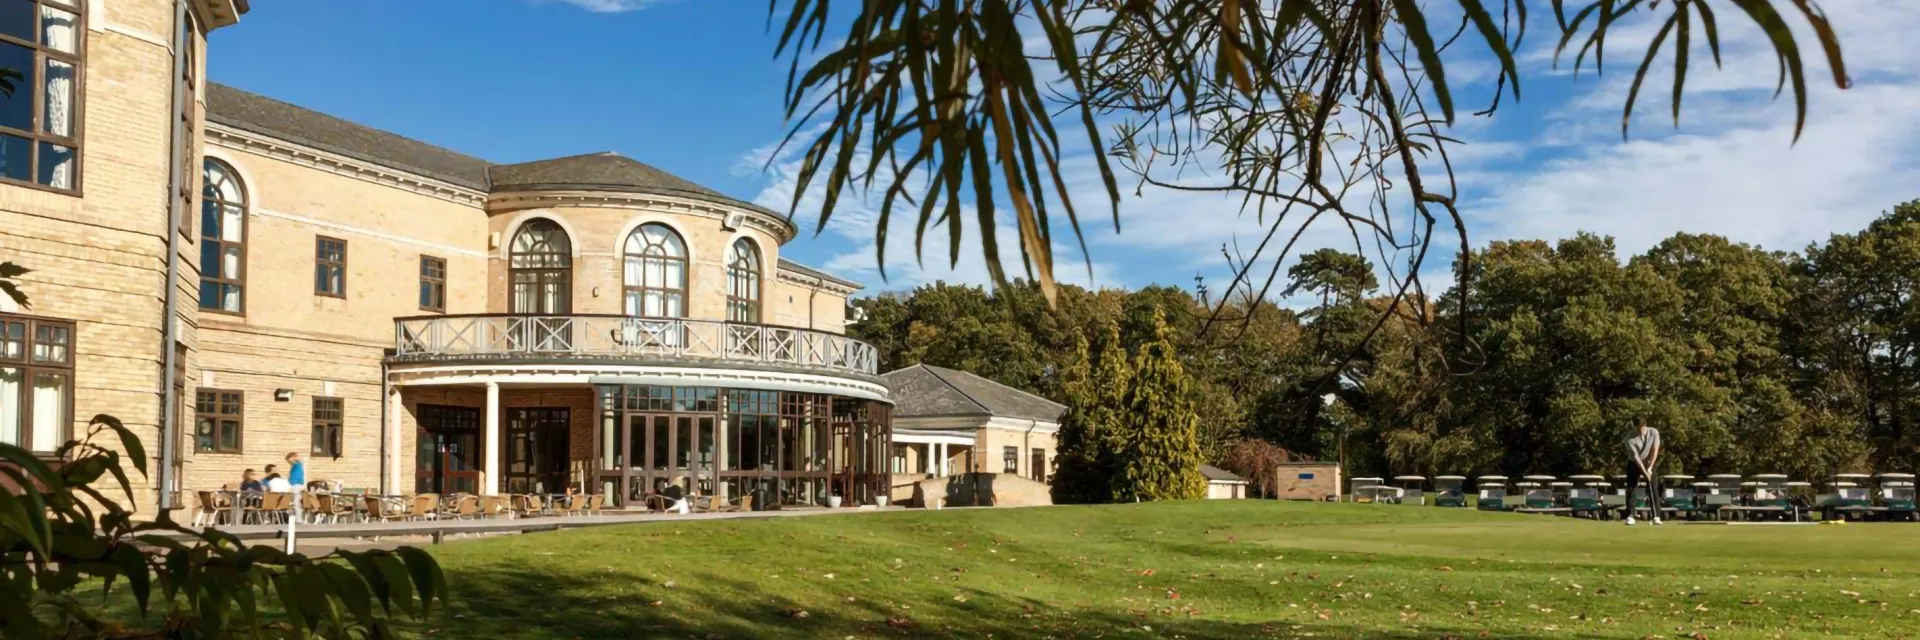 Belton Woods Hotel, Spa & Golf Resort  The Q Hotels Collection